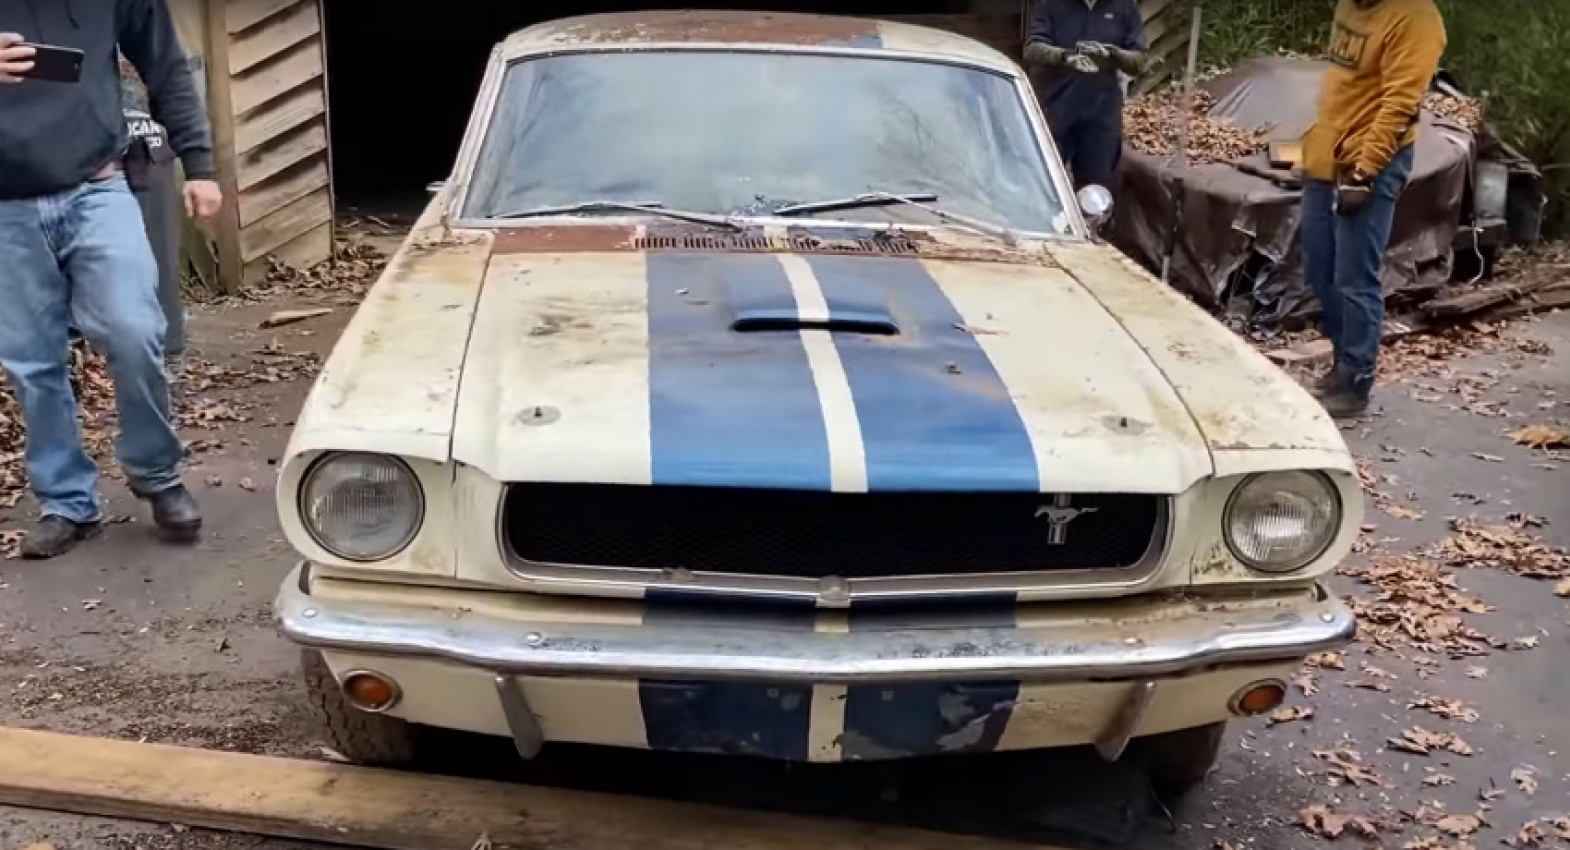 autos, cars, ford, news, shelby, barn finds, classics, ford mustang, ford videos, video, historic 1965 ford mustang shelby gt350 was hiding in an abandoned house for decades